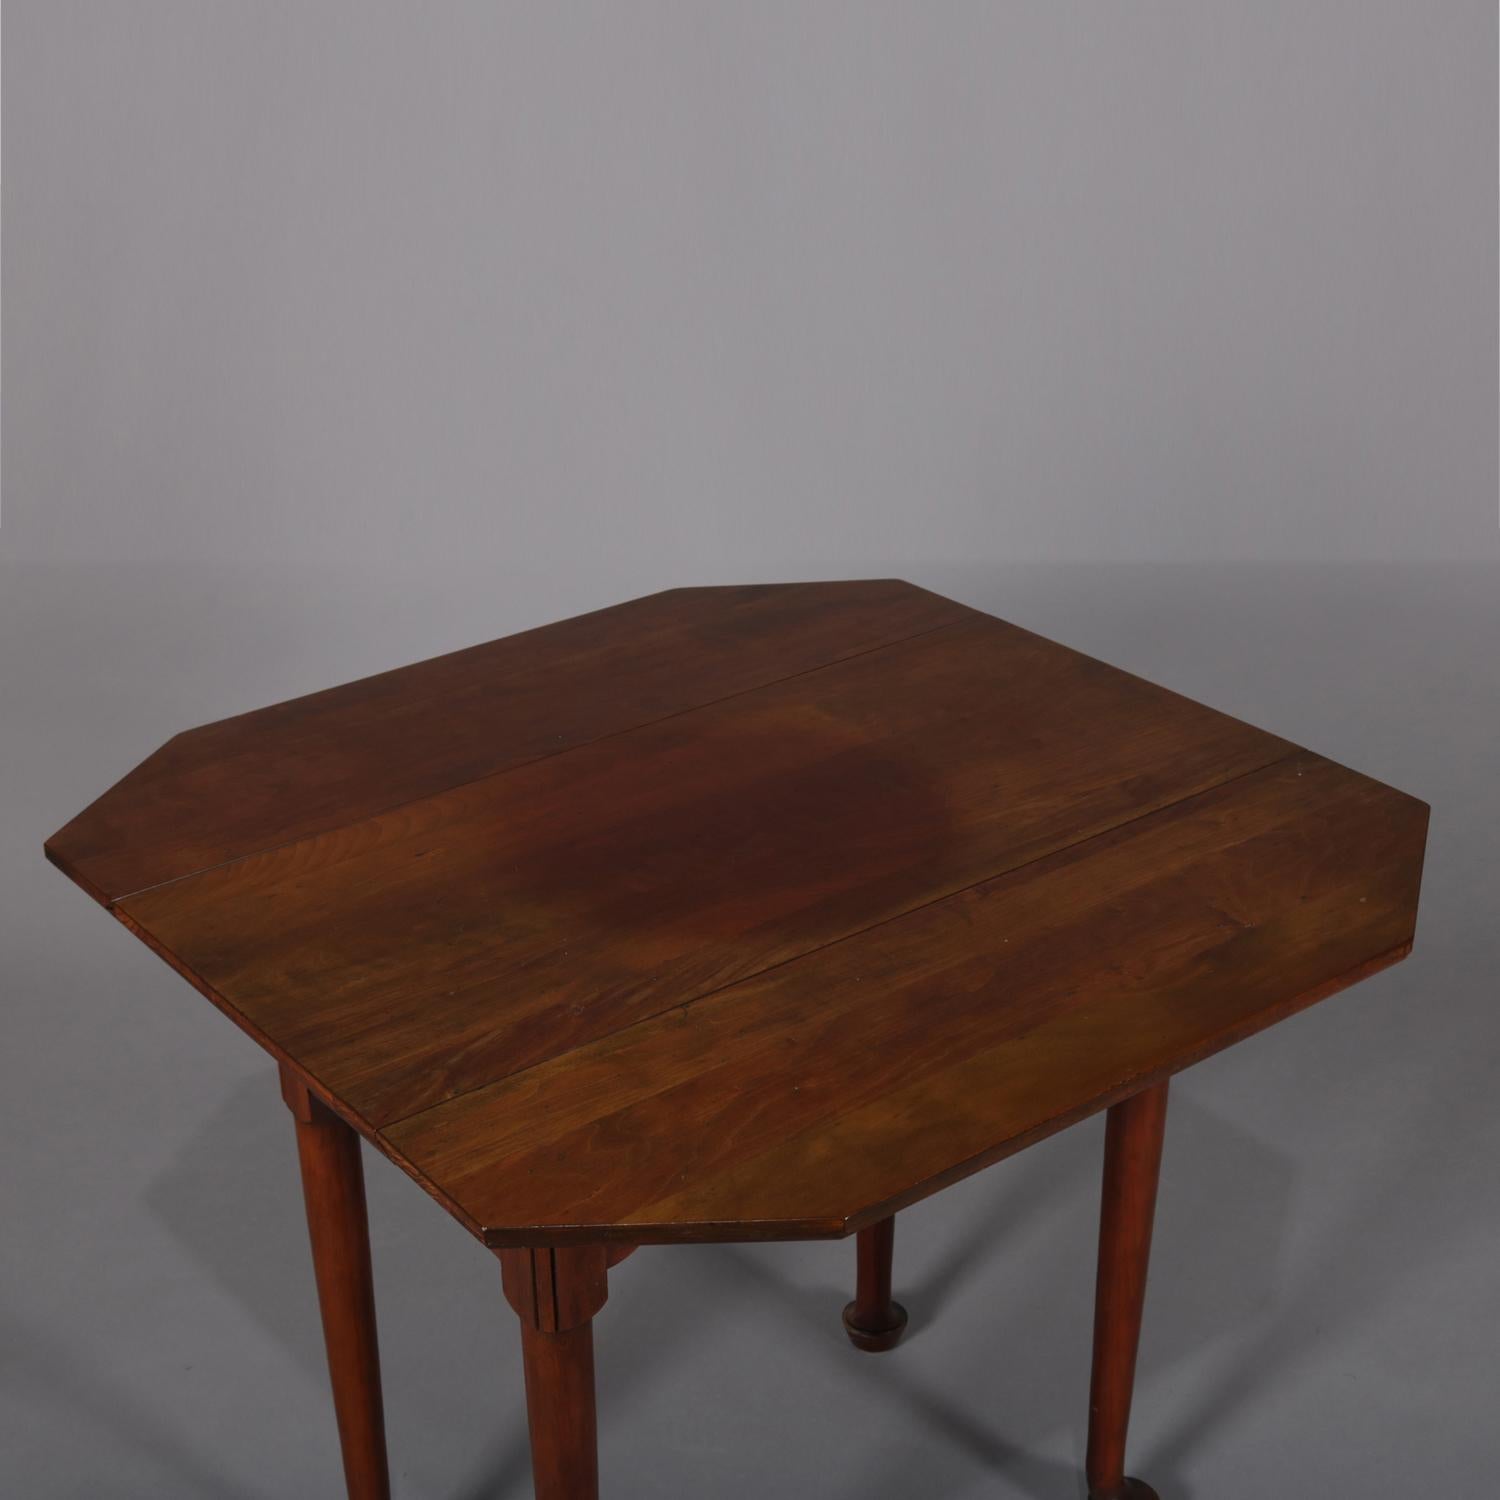 Carved Antique Queen Anne Mahogany Drop Leaf and Clip Corner Pembroke Table